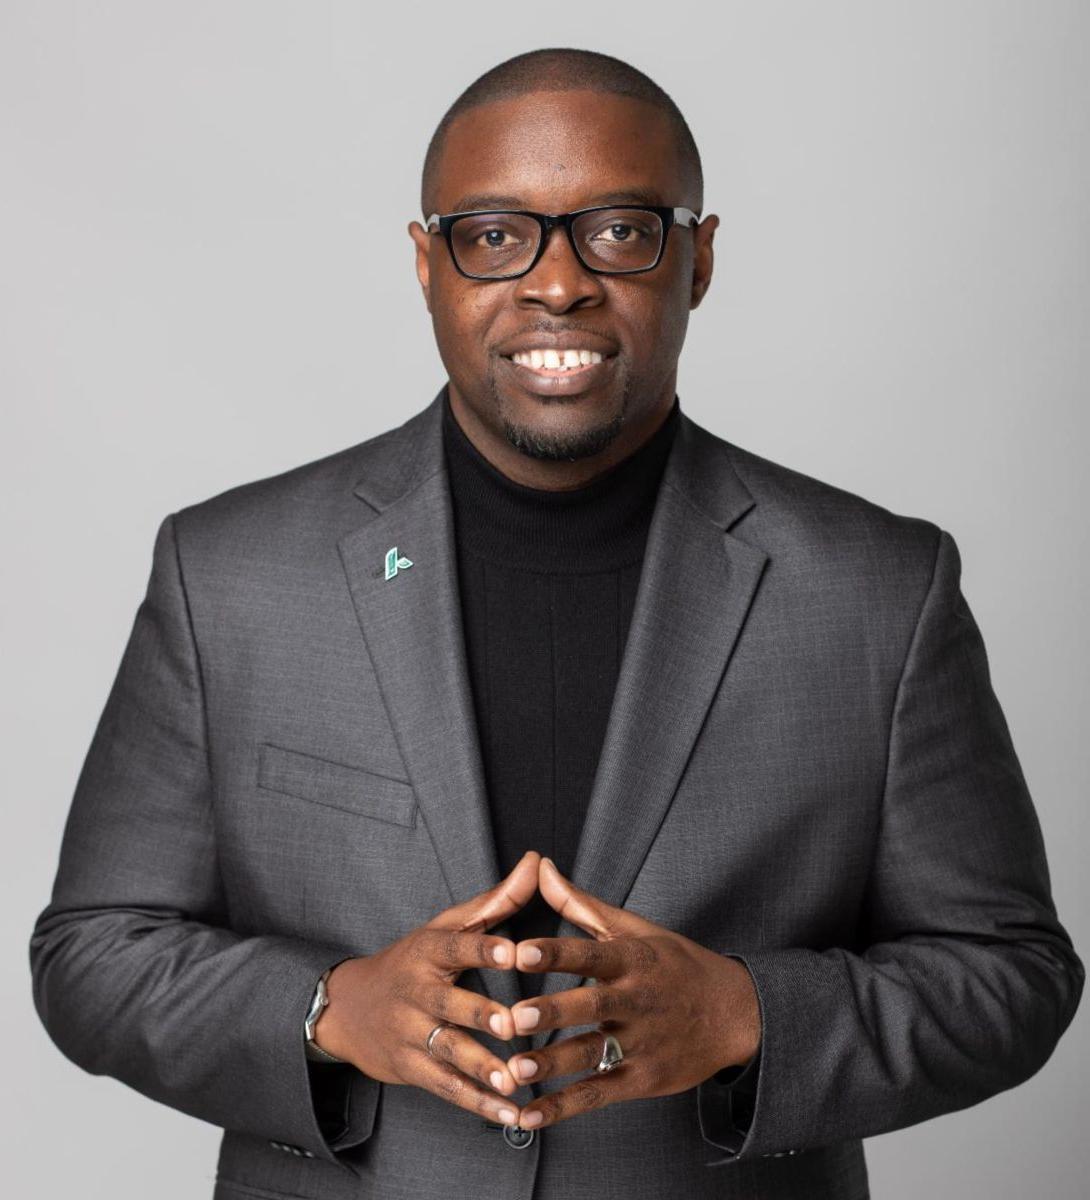 Dr. Jermaine Whirl, an African American male, smiles wearing a grey suit jacket over a black shirt with his hands steepled towards the camera in front of his abdomen.